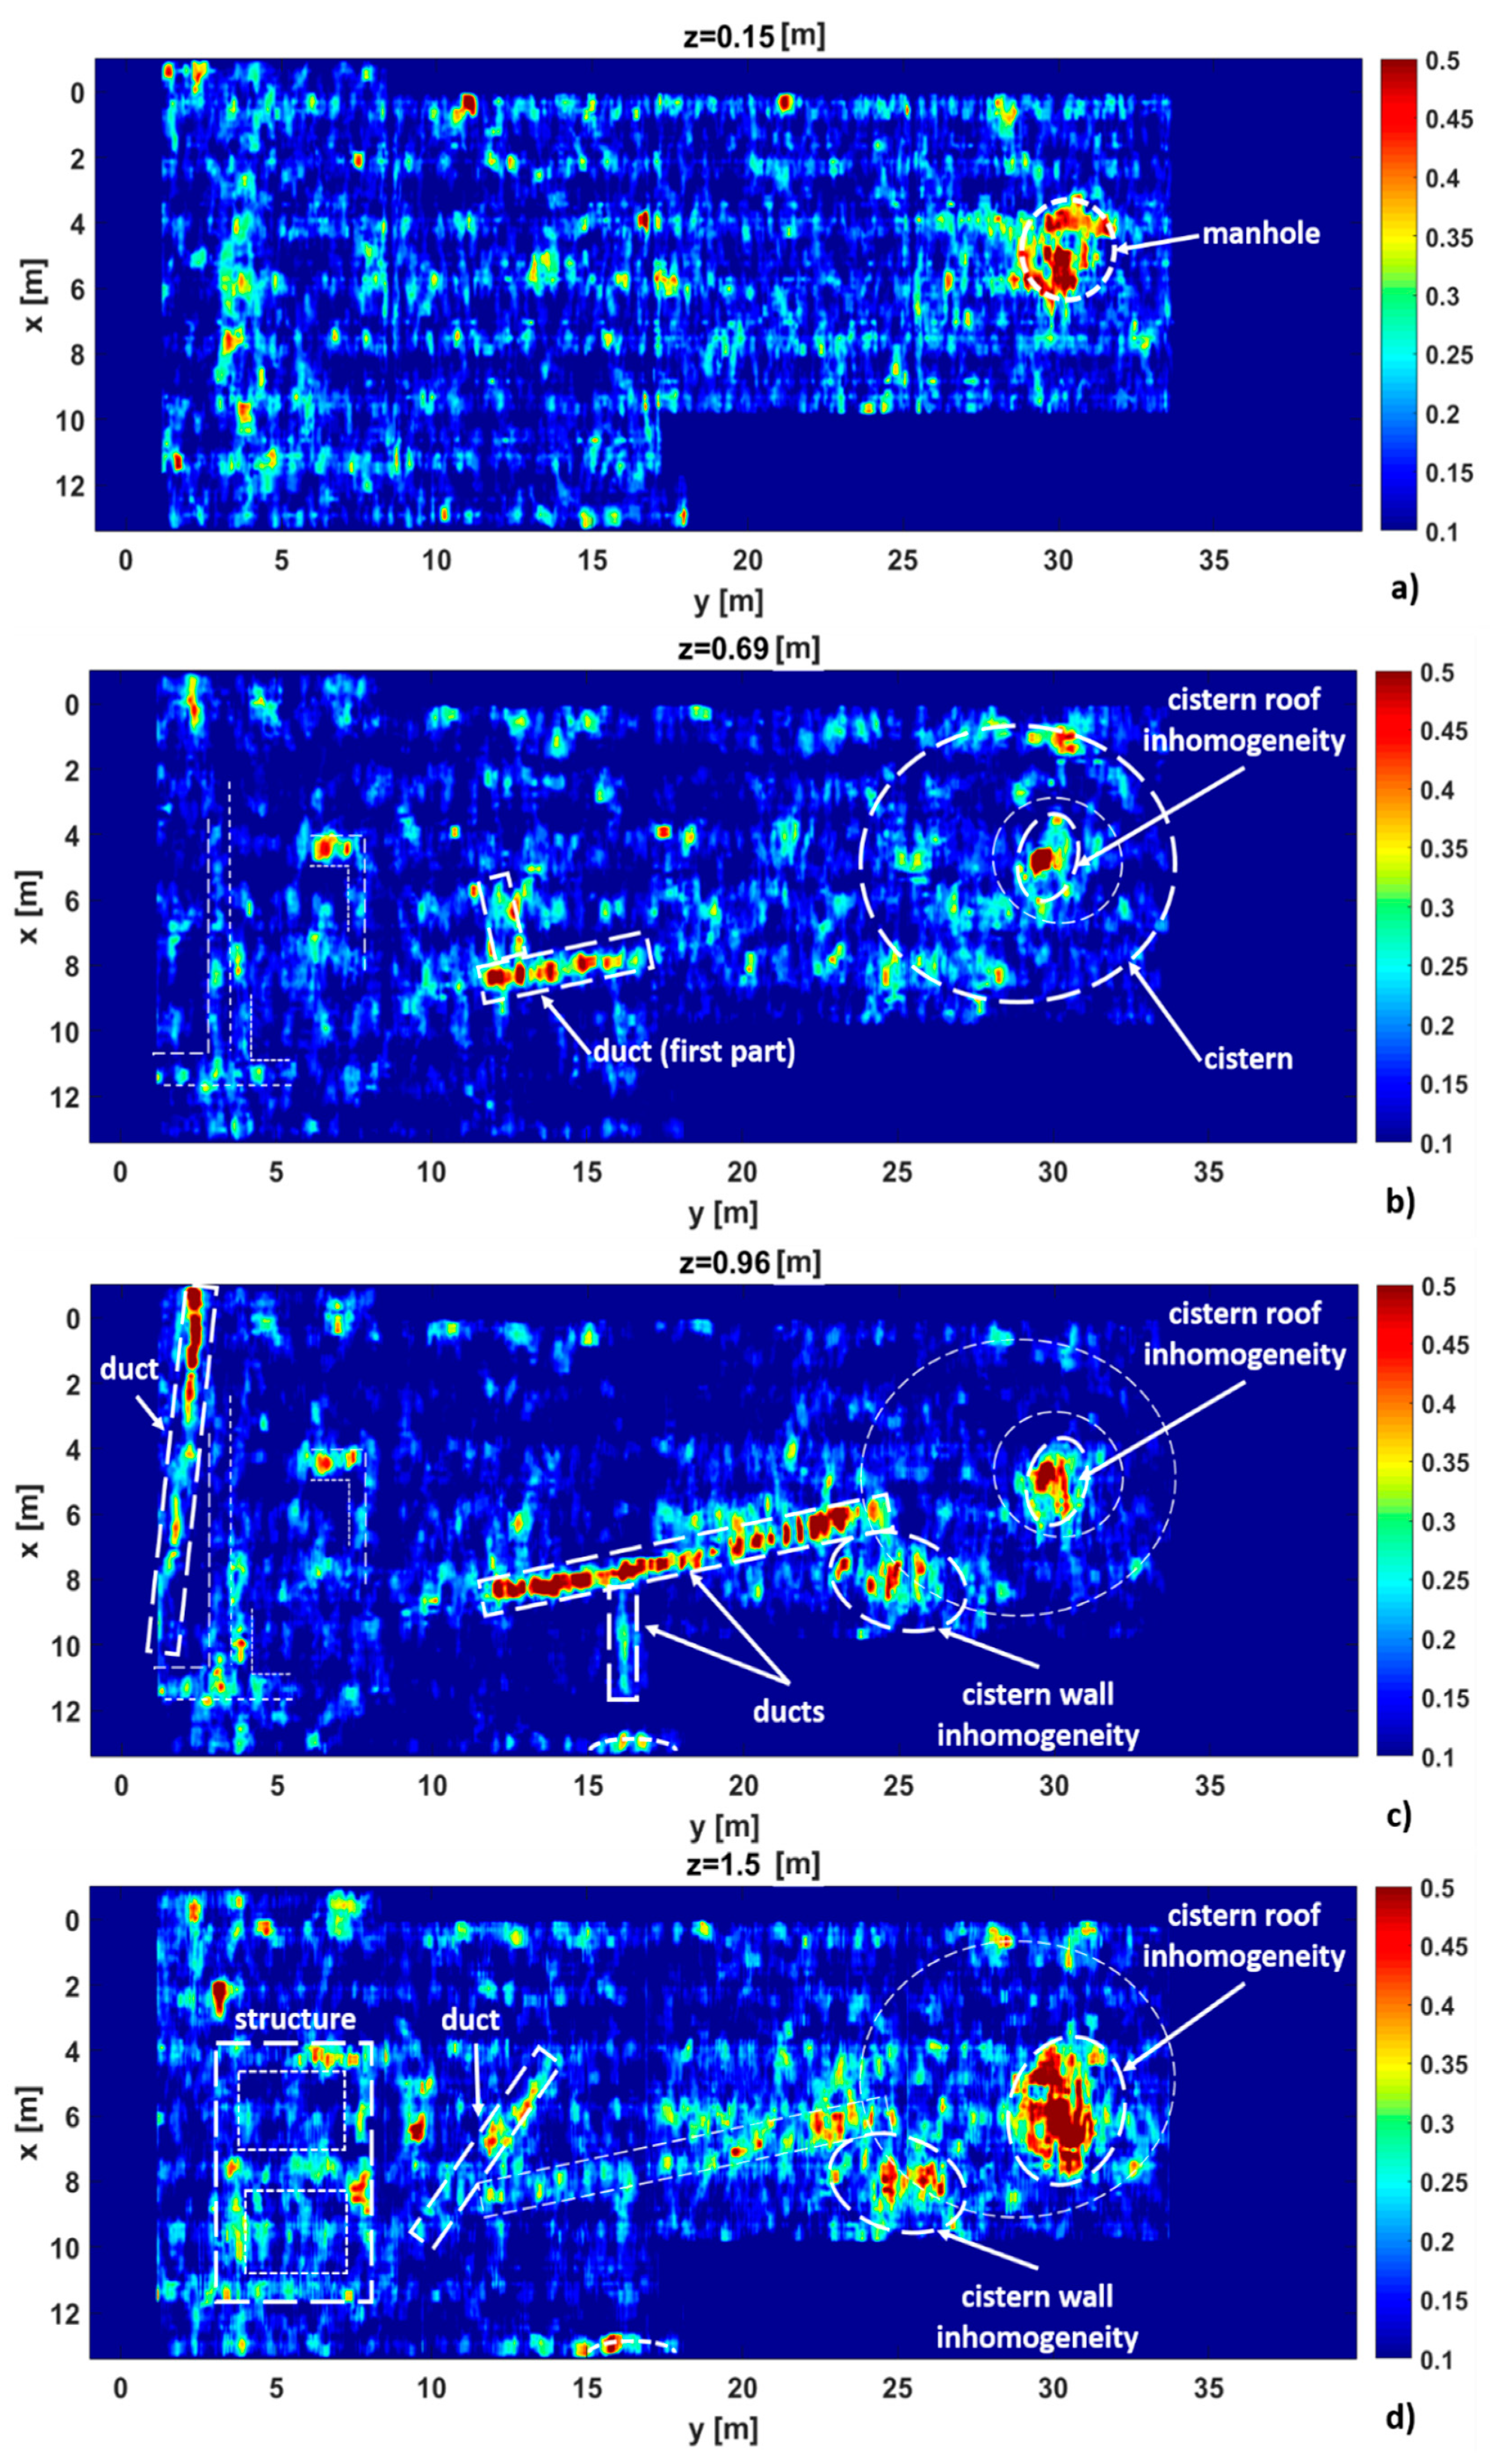 Remote Sensing Free Full Text Gpr And Ert Investigations In Urban Areas The Case Study Of Matera Southern Italy Html